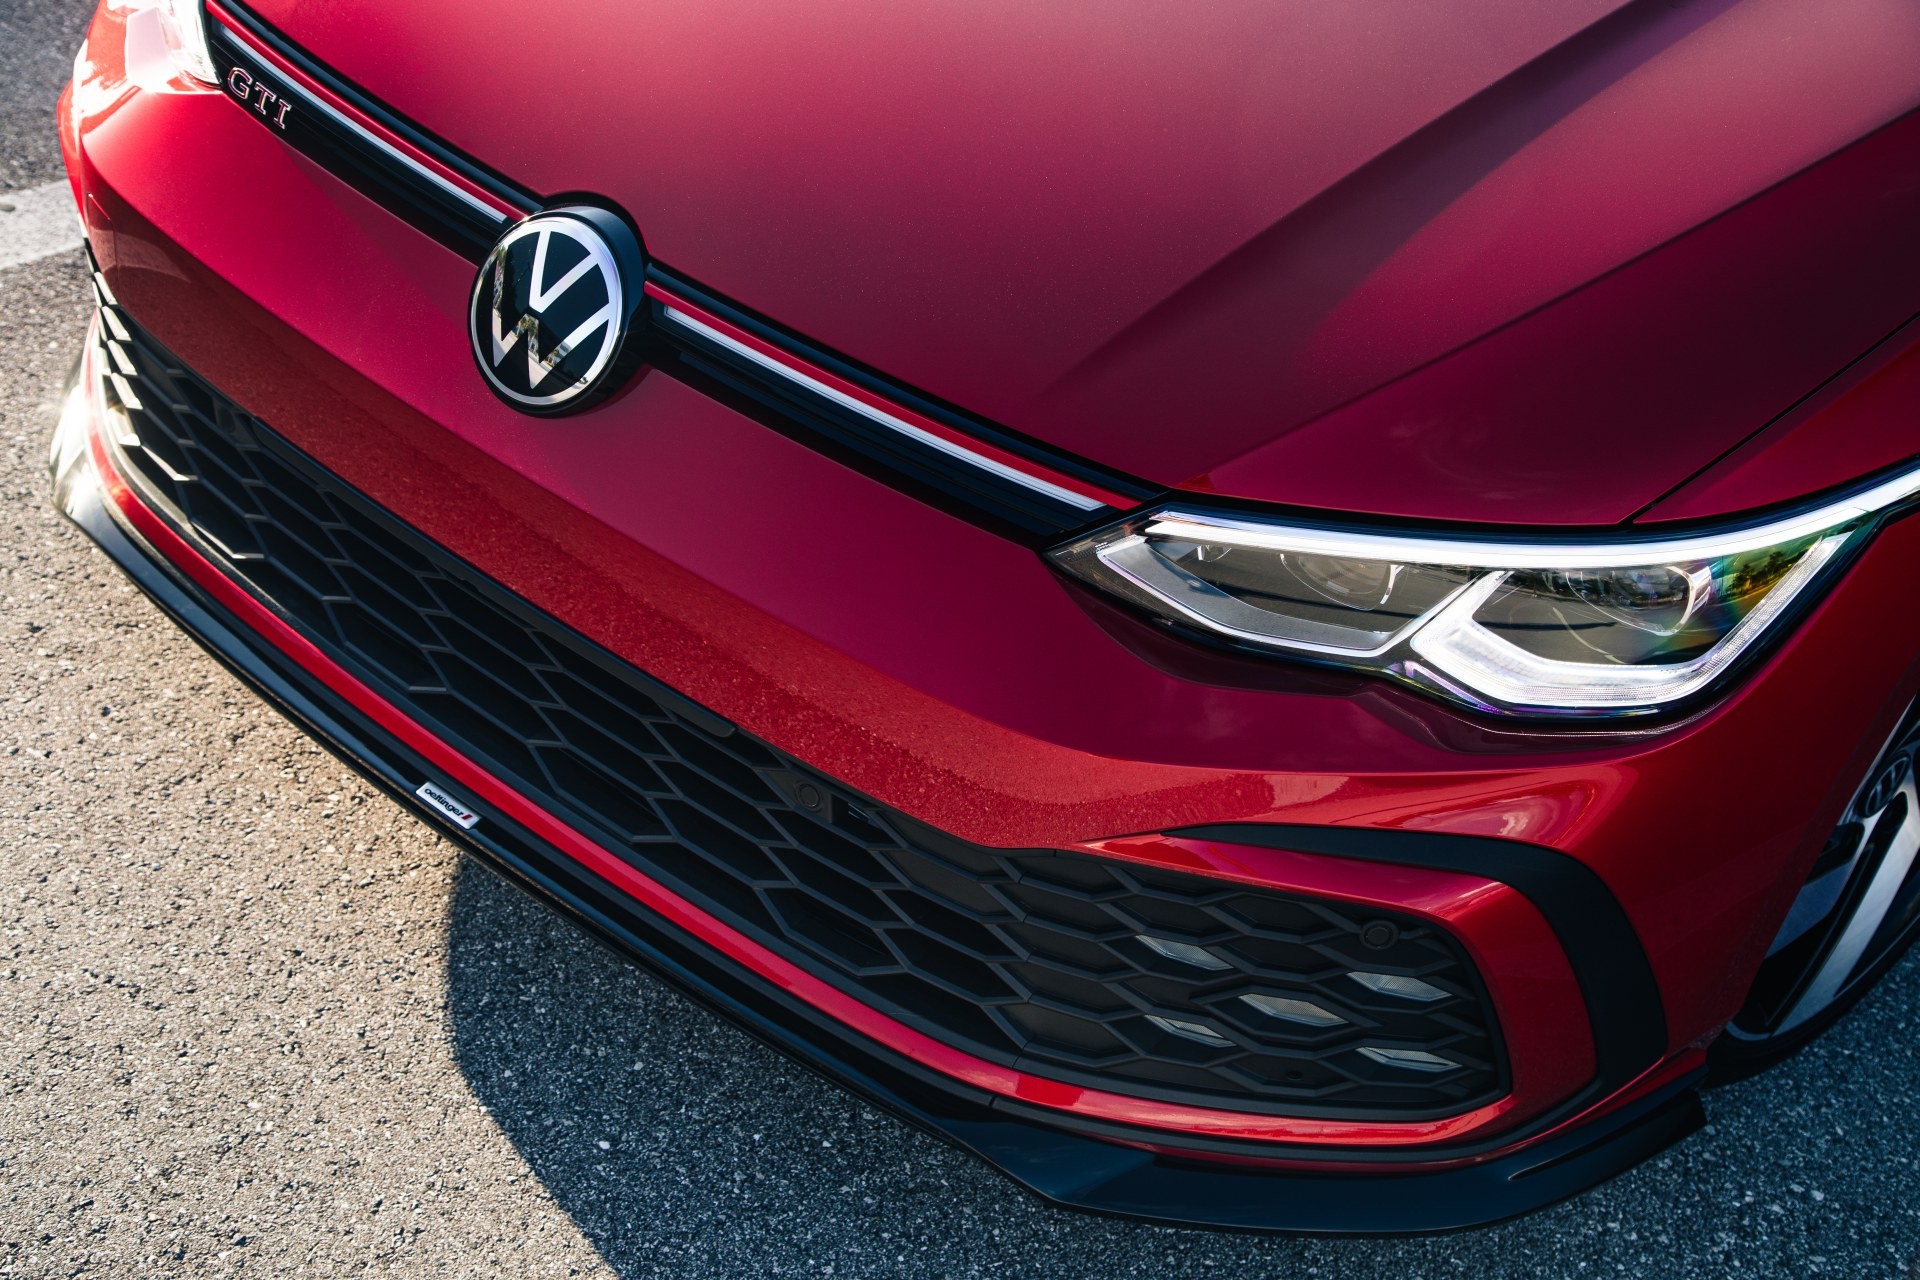 https://s1.cdn.autoevolution.com/images/news/gallery/volkswagen-golf-gti-and-golf-r-get-new-accessories-as-options-it-s-all-for-show_1.jpg